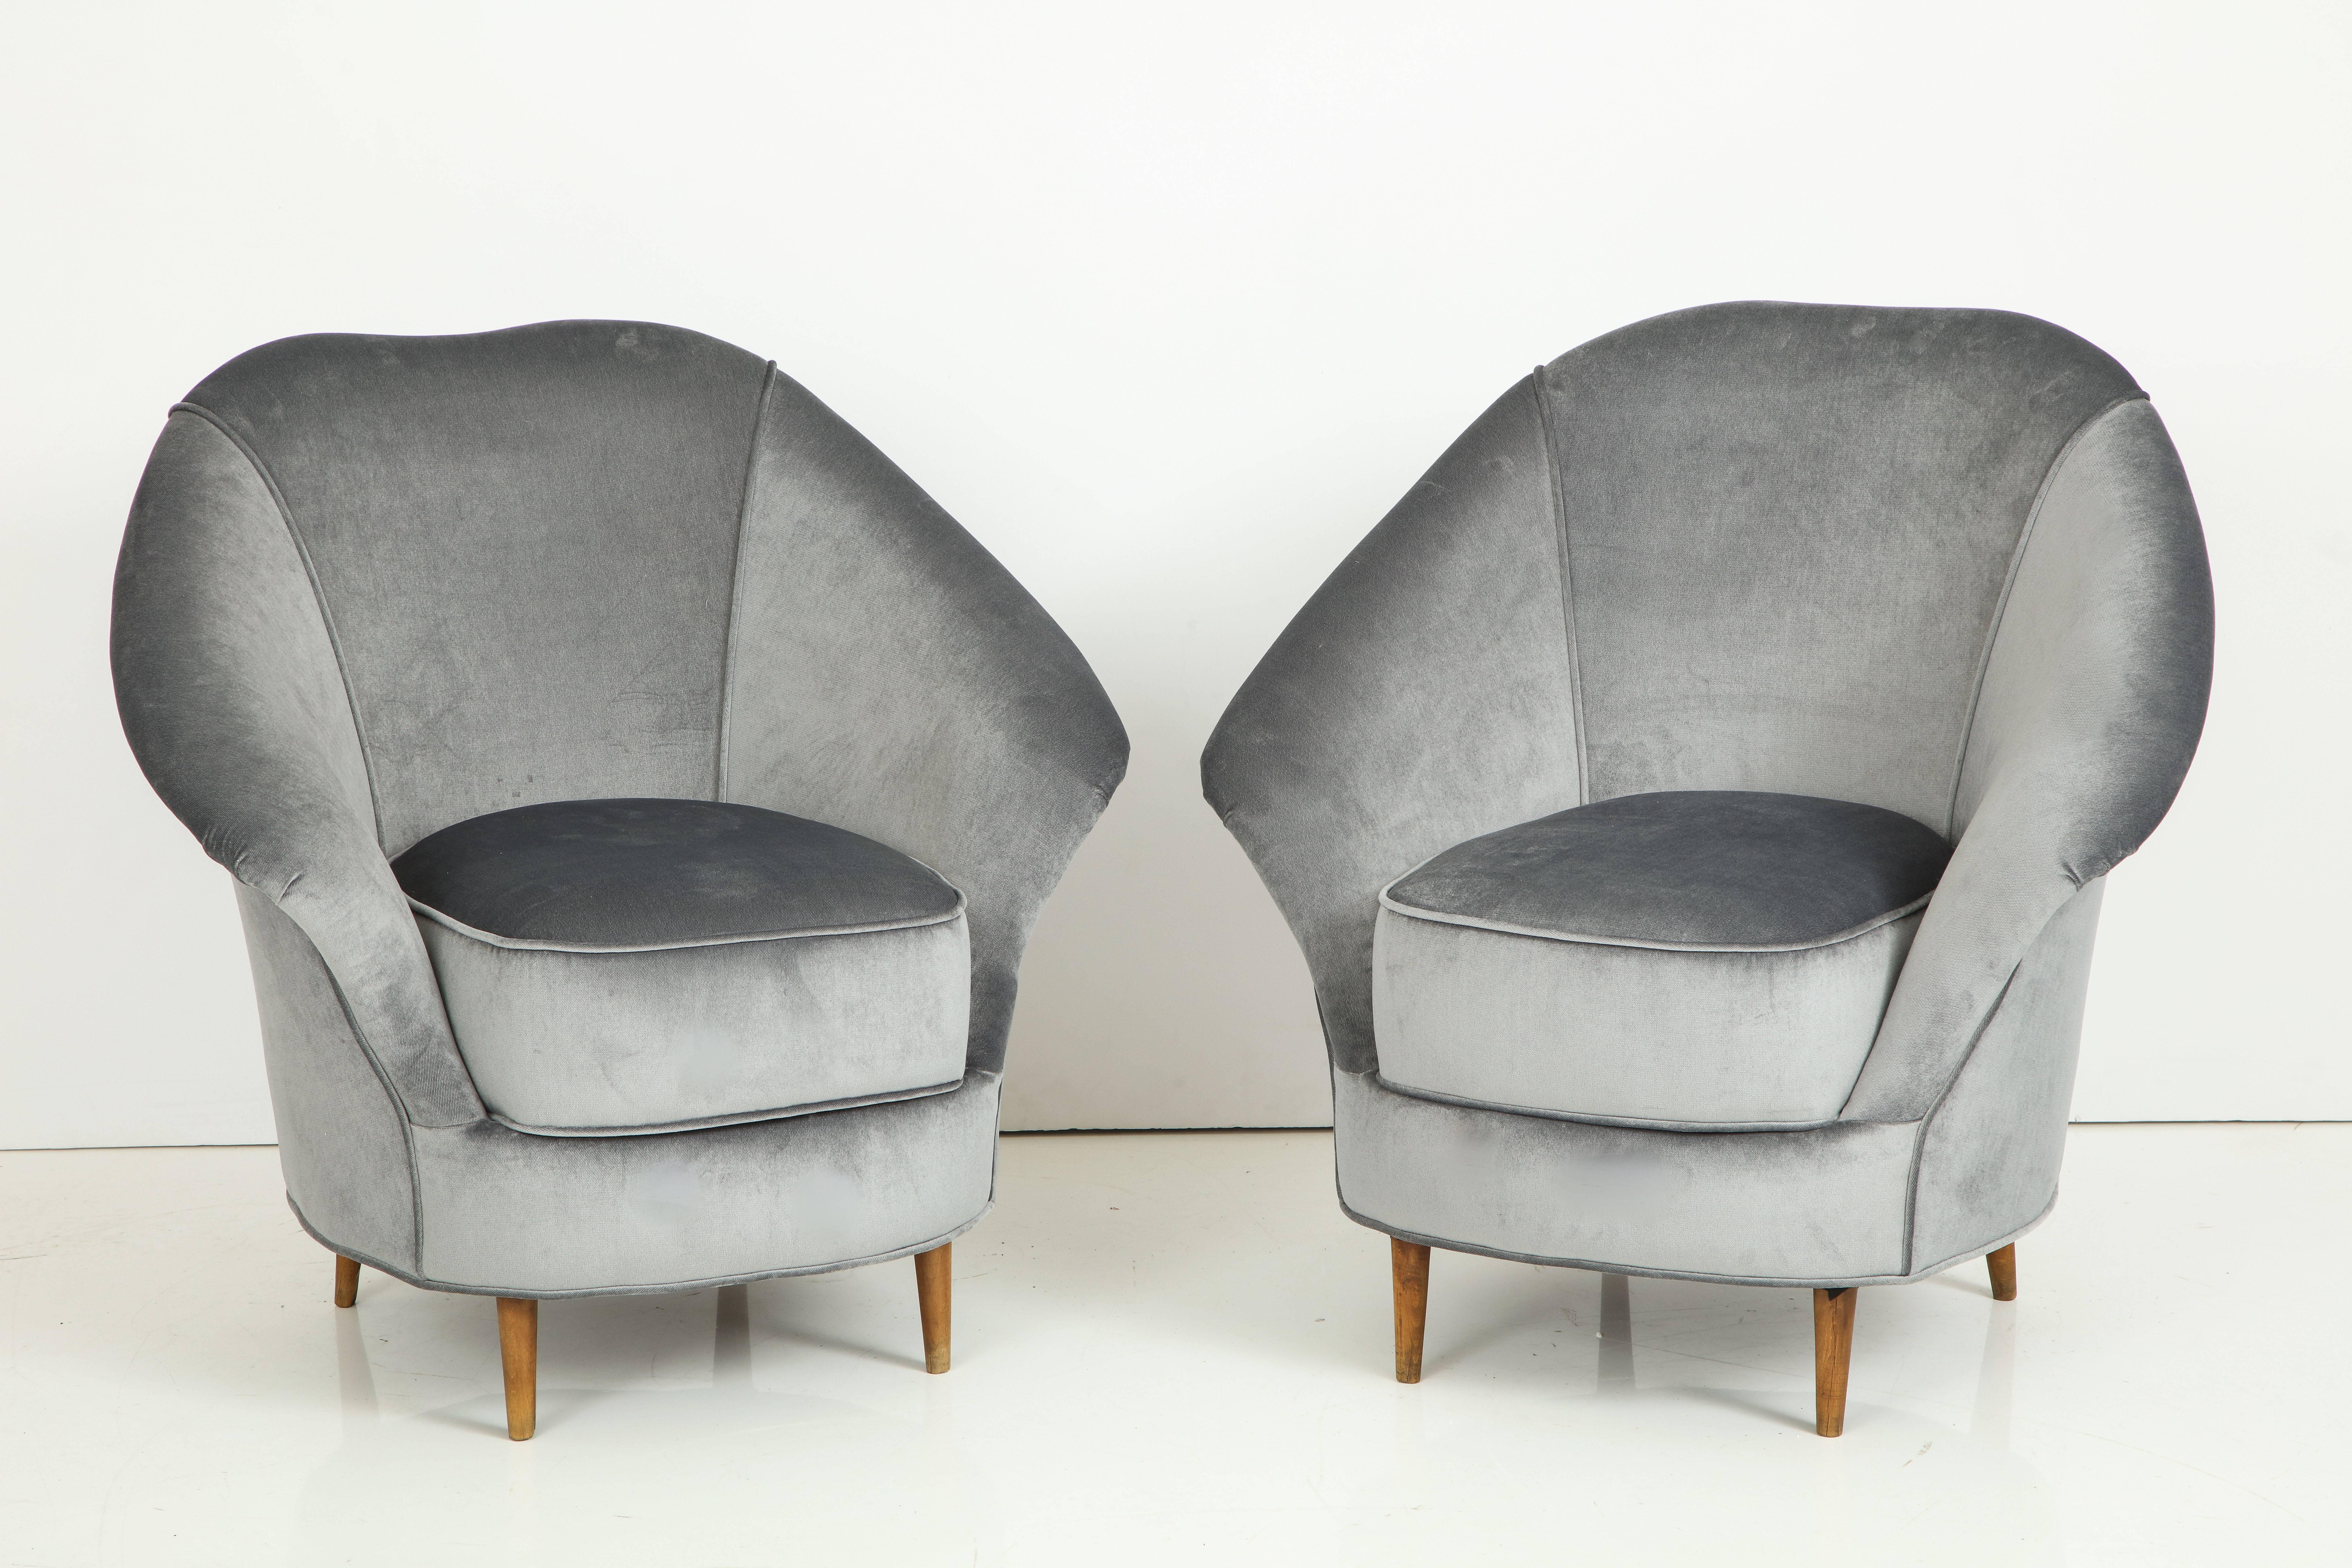 Elegant pair of restored vintage 1940s Italian armchairs in the style of Gio Ponti produced by Casa e Giardino with original walnut tapered legs. Sculptural mid-century Italian design with curved back. Completely restored and newly reupholstered in